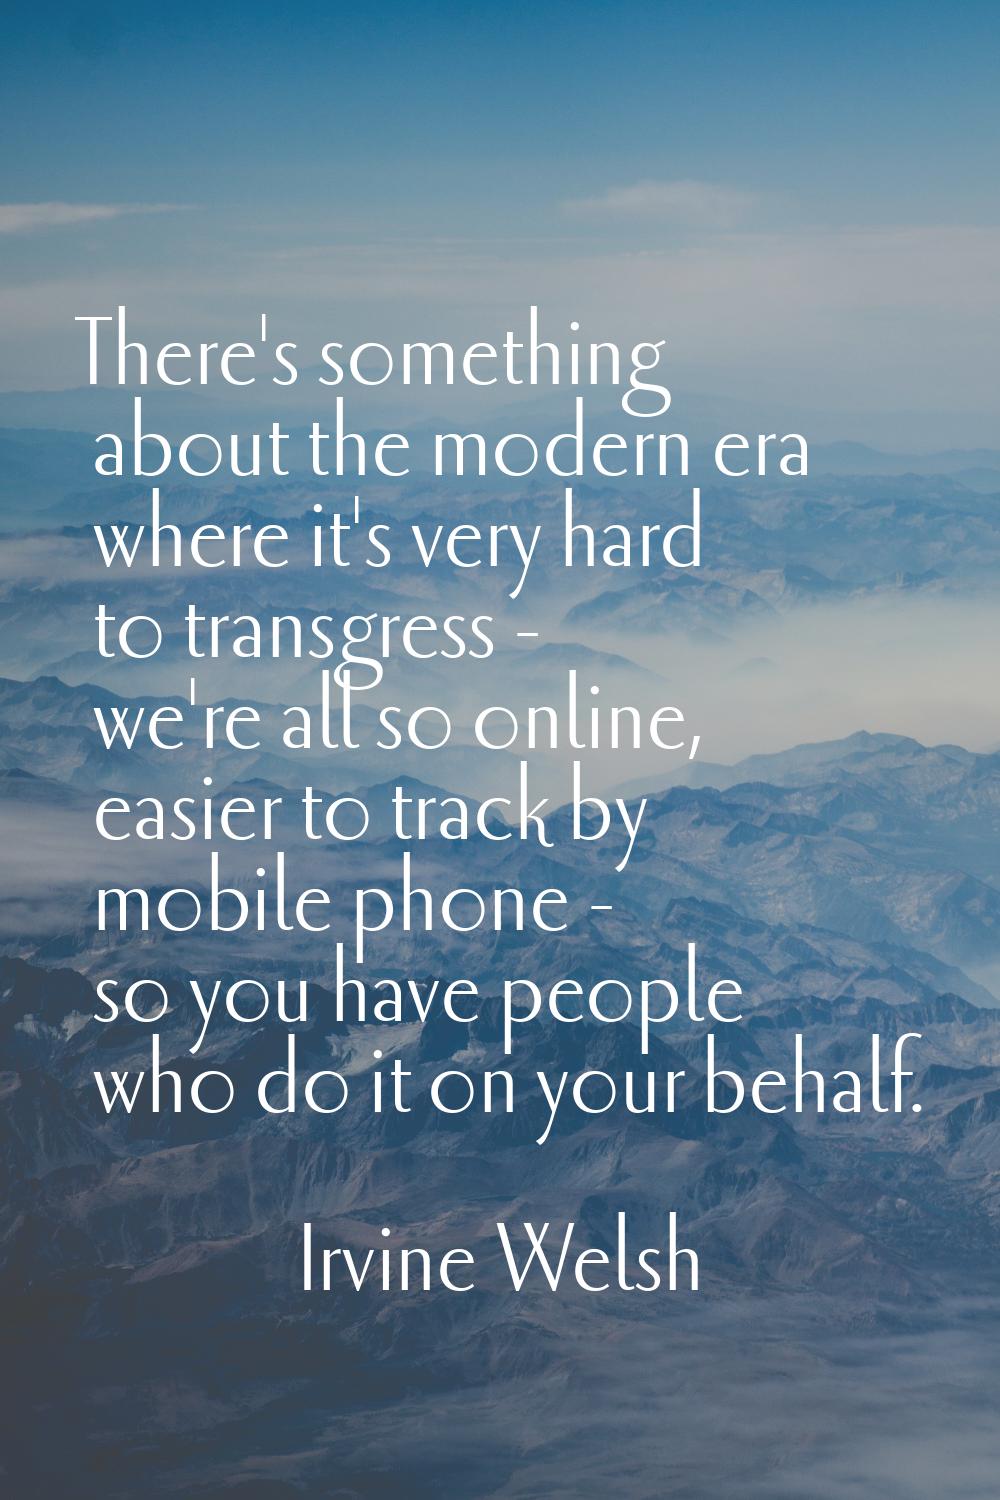 There's something about the modern era where it's very hard to transgress - we're all so online, ea